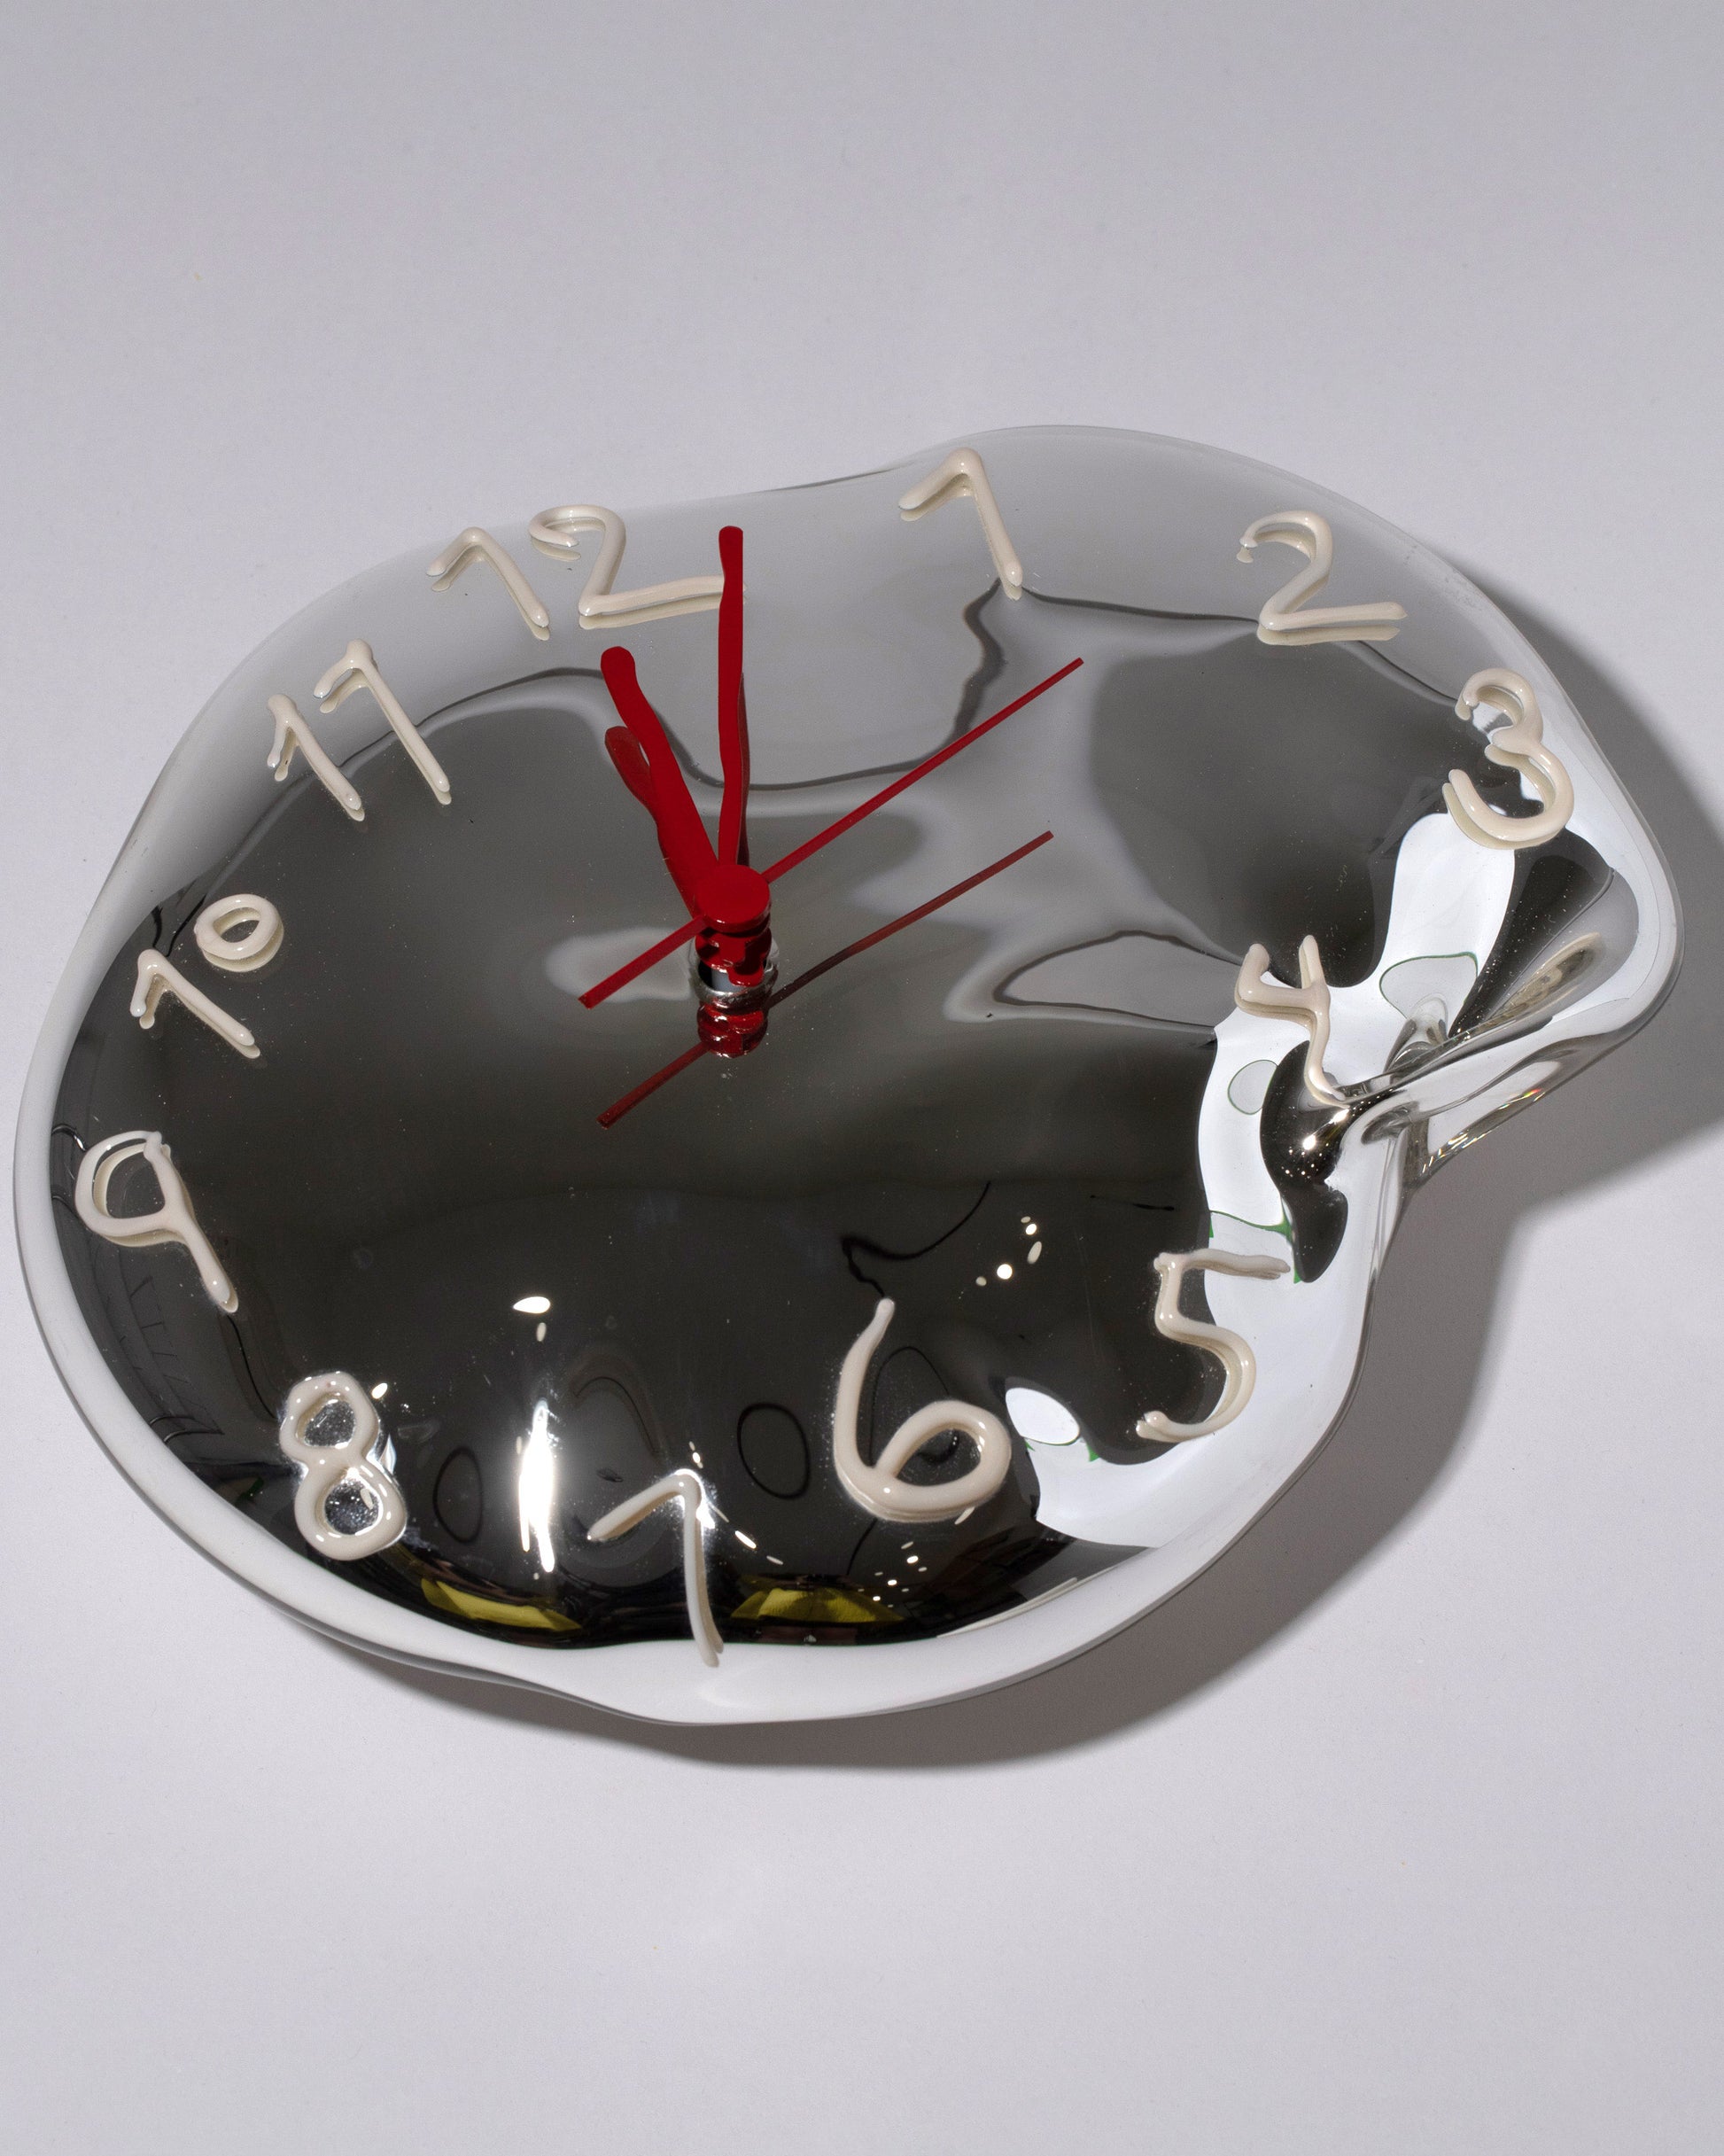 Silje Lindrup Cream Two Glass Wall Clock on light color background.